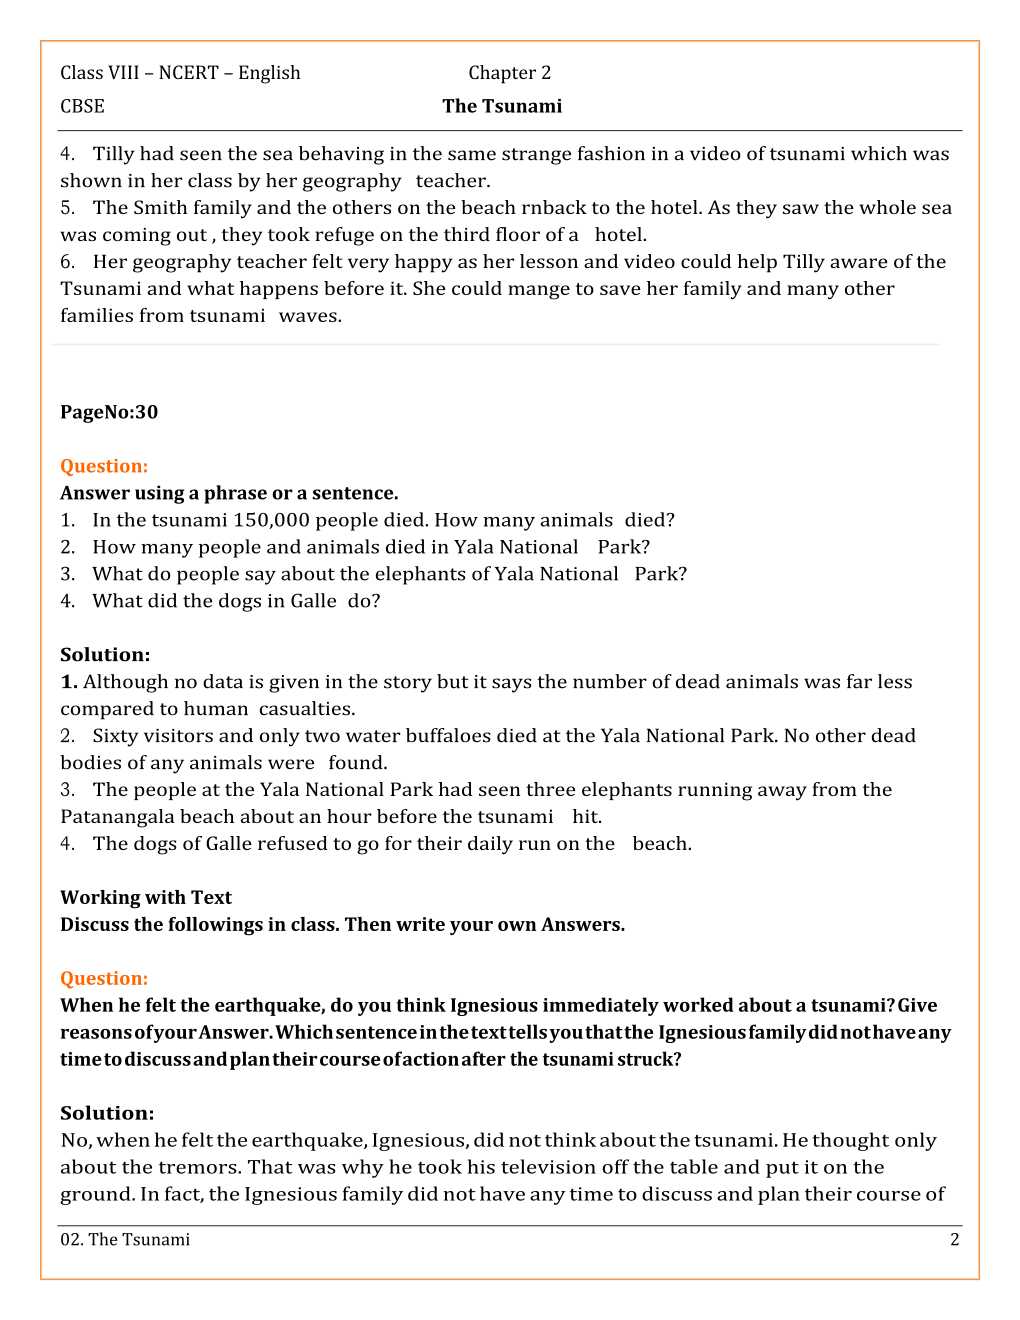 NCERT Solutions For Class 8 English Honey Dew Chapter 2 